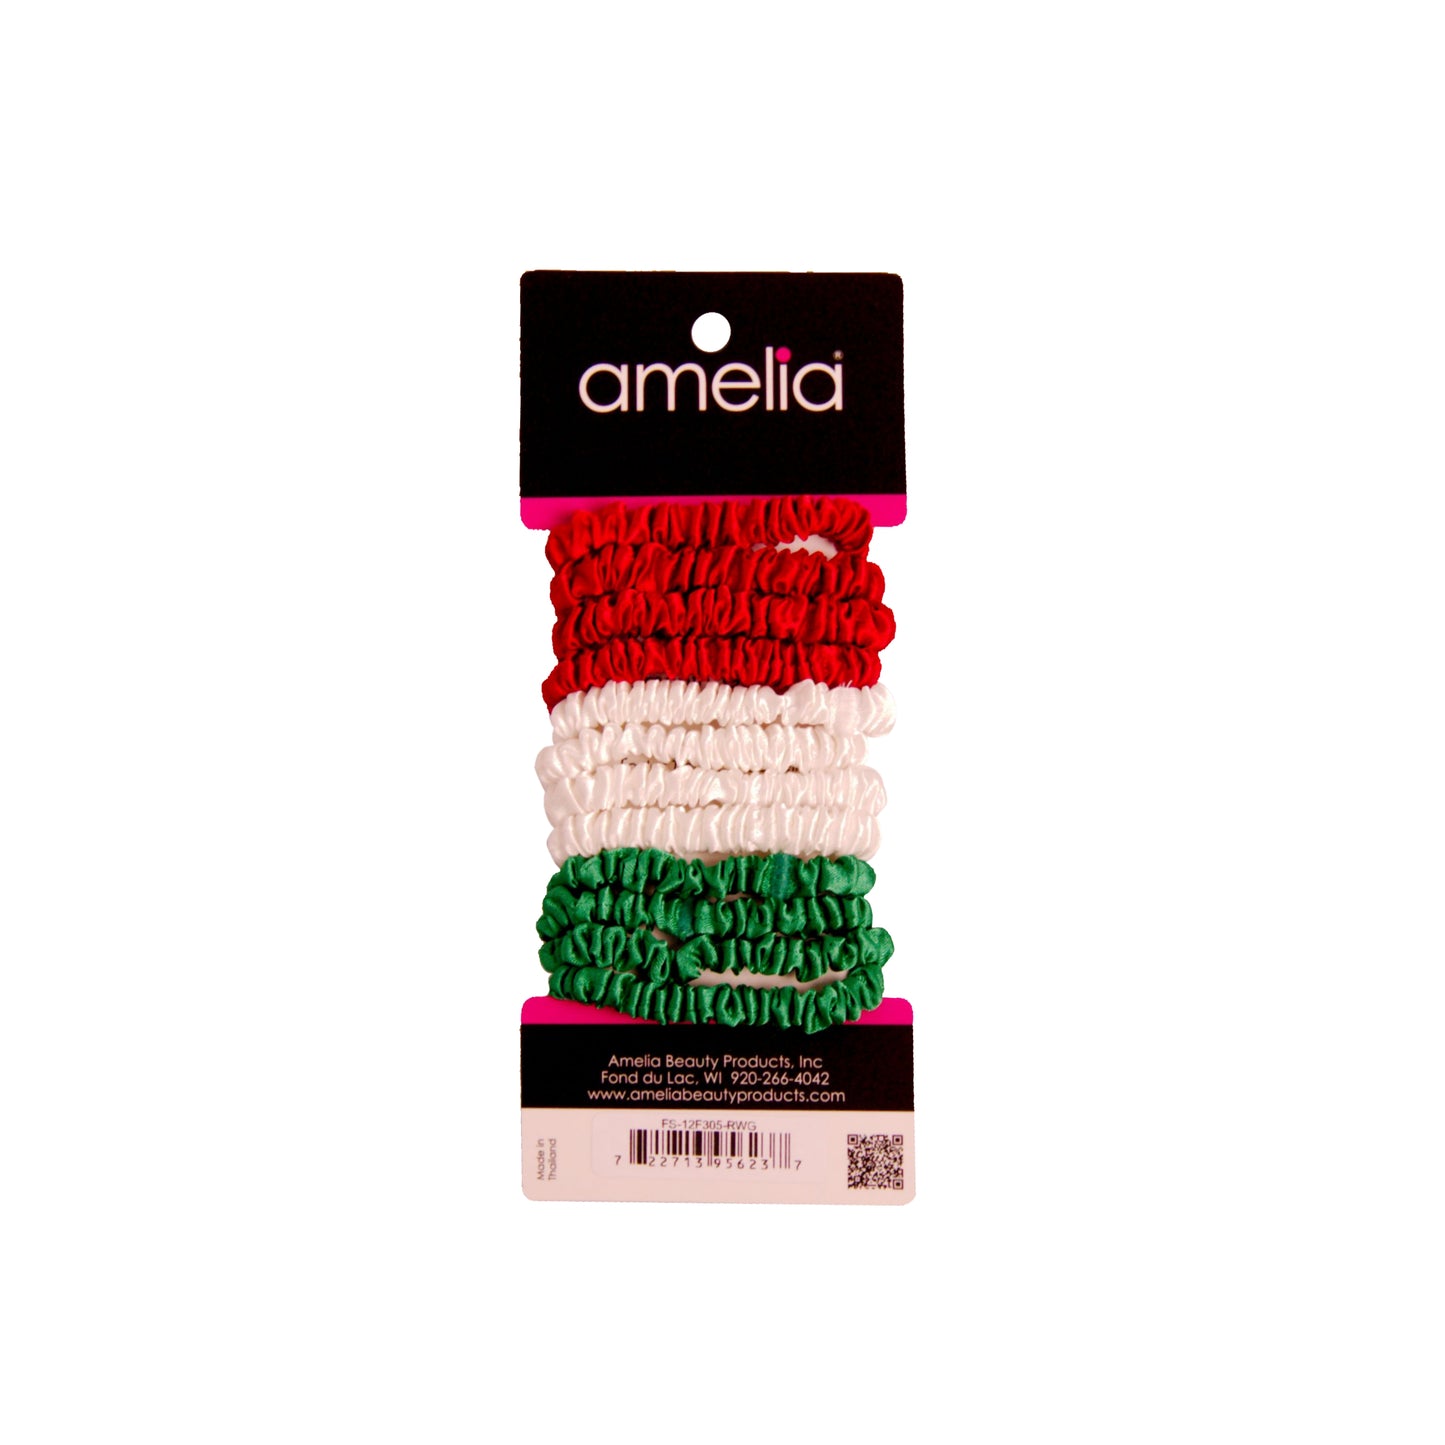 Amelia Beauty, Red, White and Green Mix Skinny Satin Scrunchies, 2in Diameter, Gentle and Strong Hold, No Snag, No Dents or Creases. 12 Pack